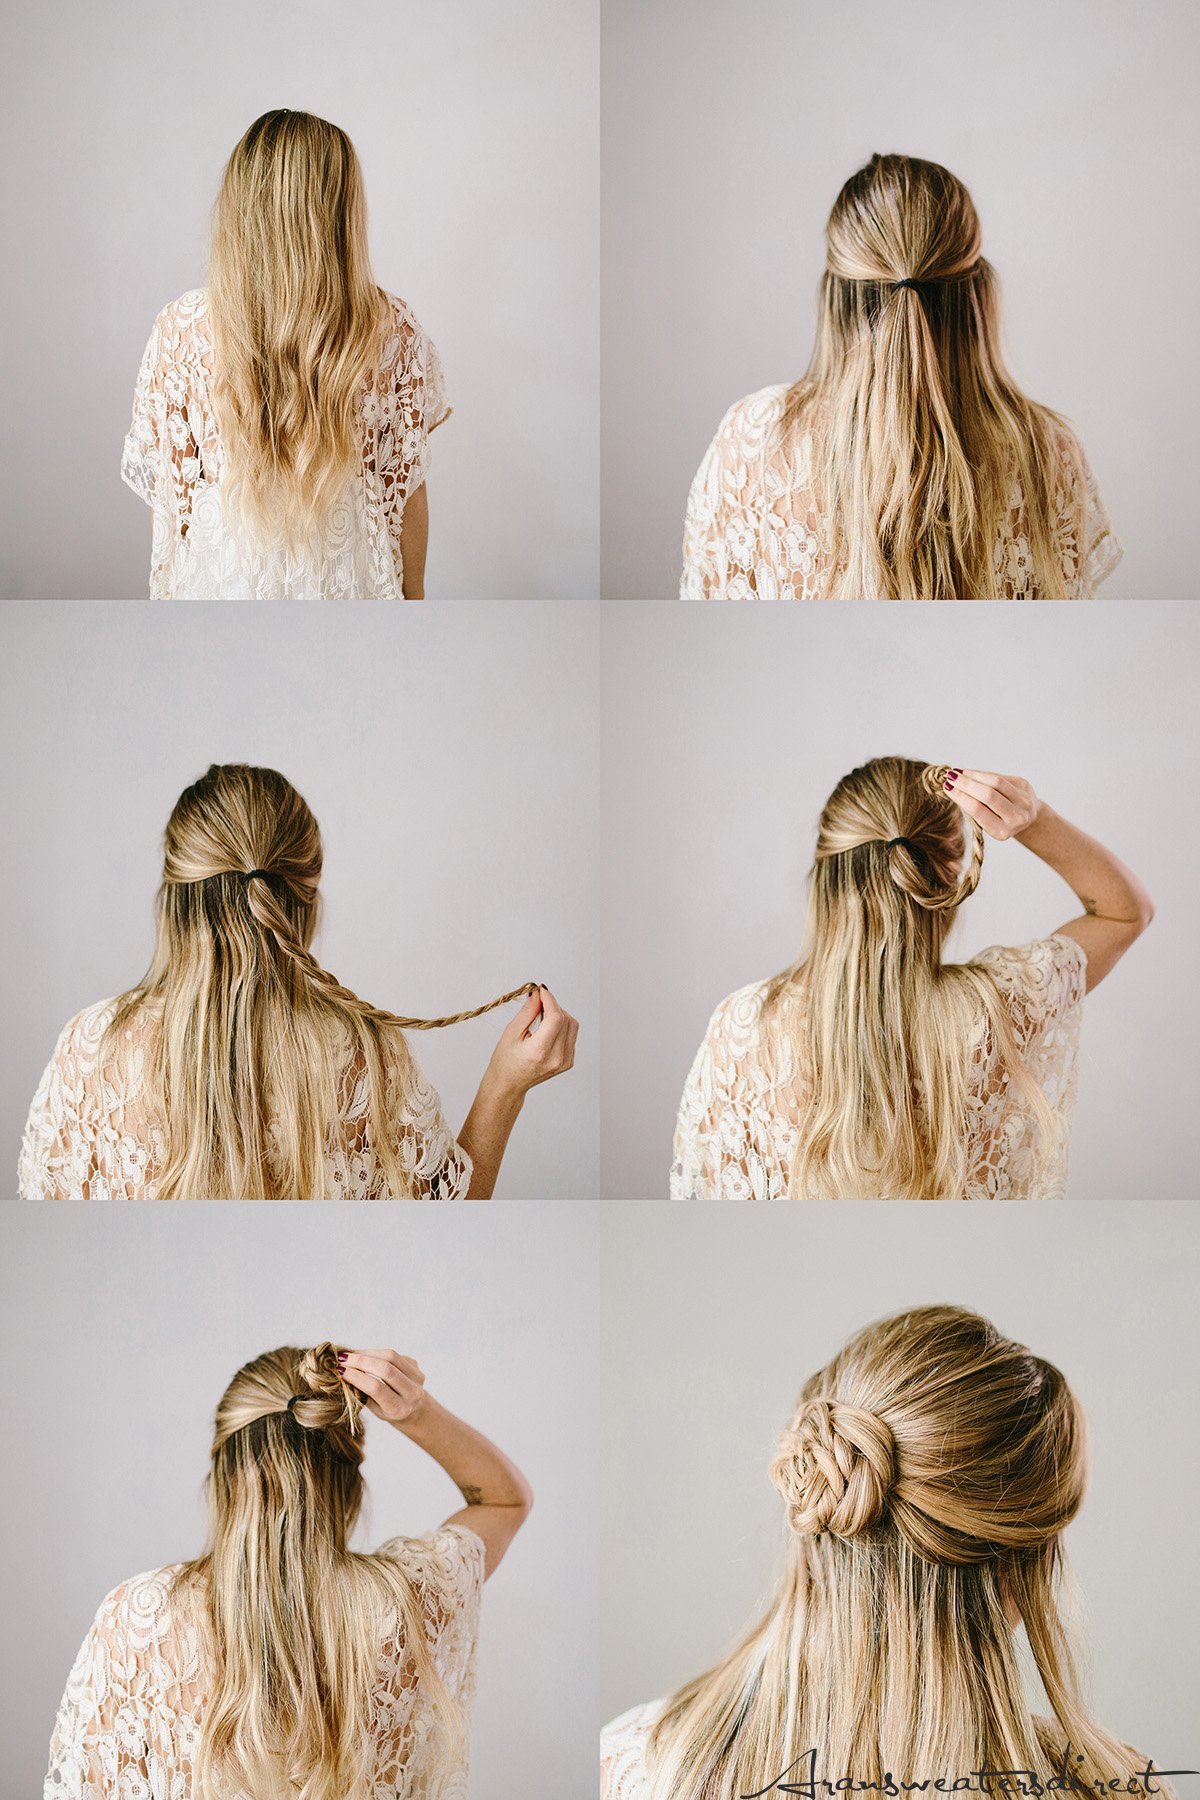 15 Super-Easy Hairstyles for For Busy Mornings